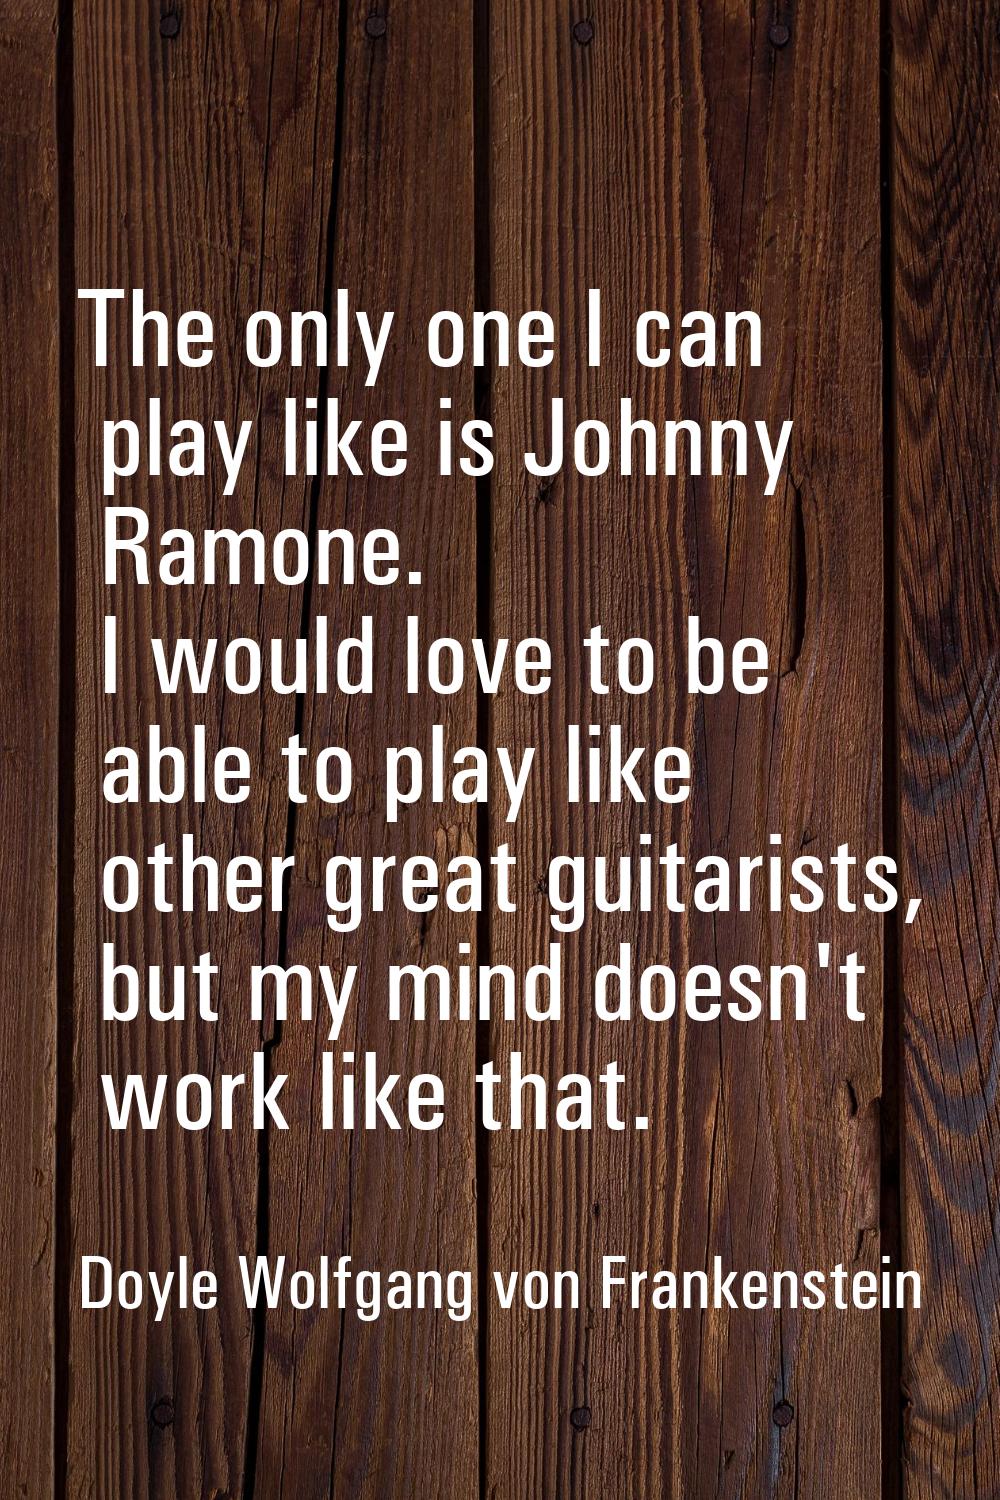 The only one I can play like is Johnny Ramone. I would love to be able to play like other great gui